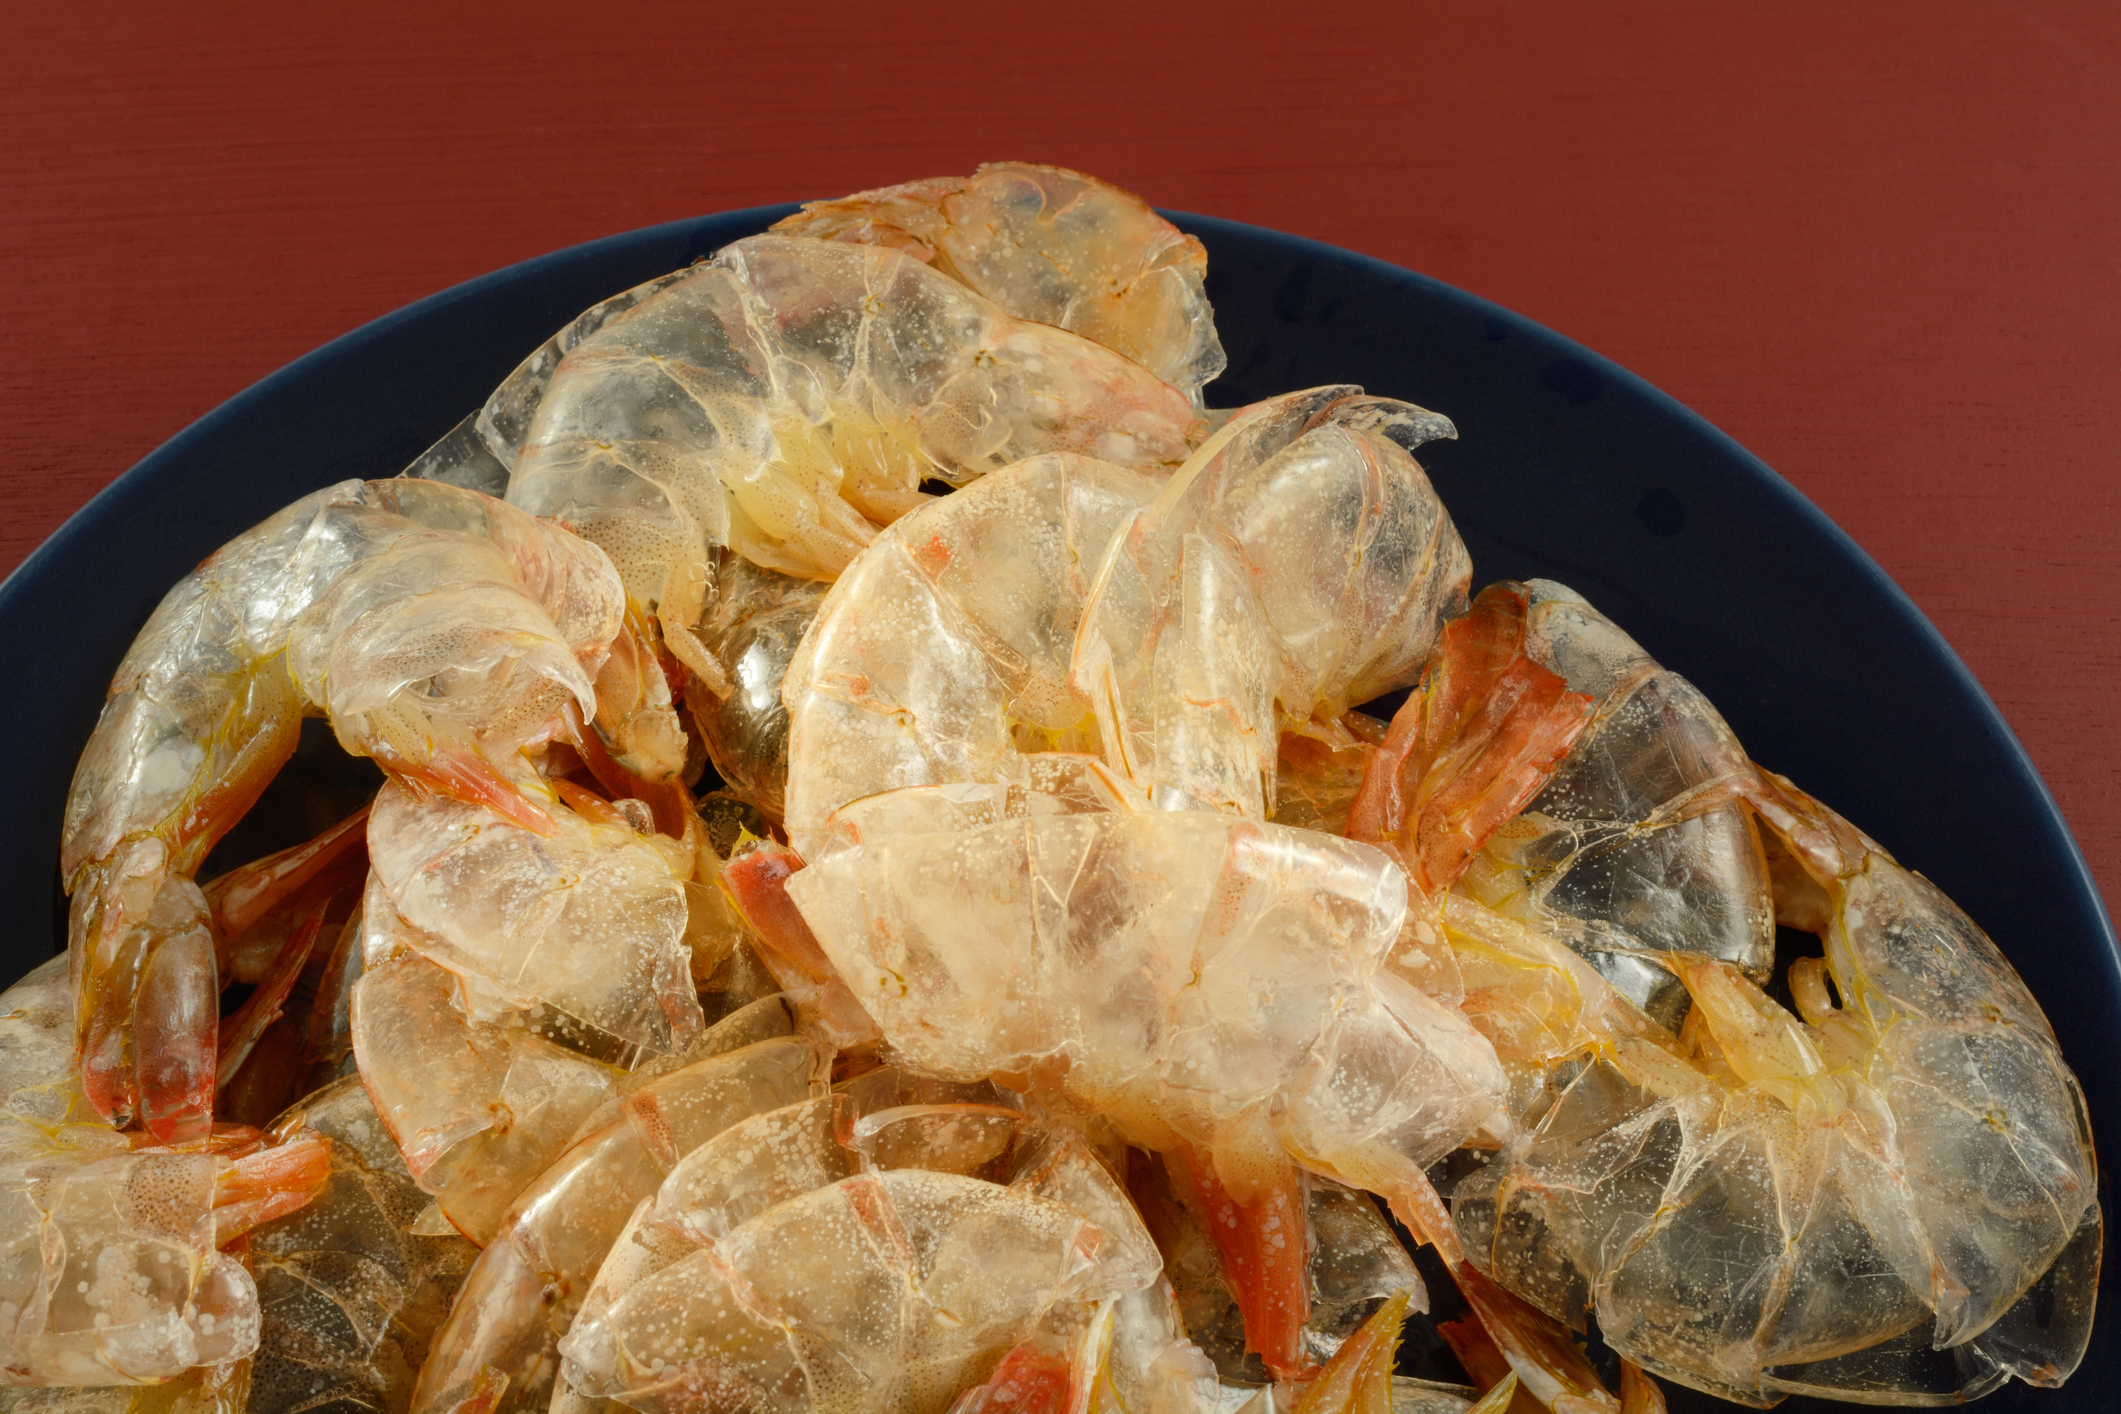 Researchers recycle shrimp waste into supplements